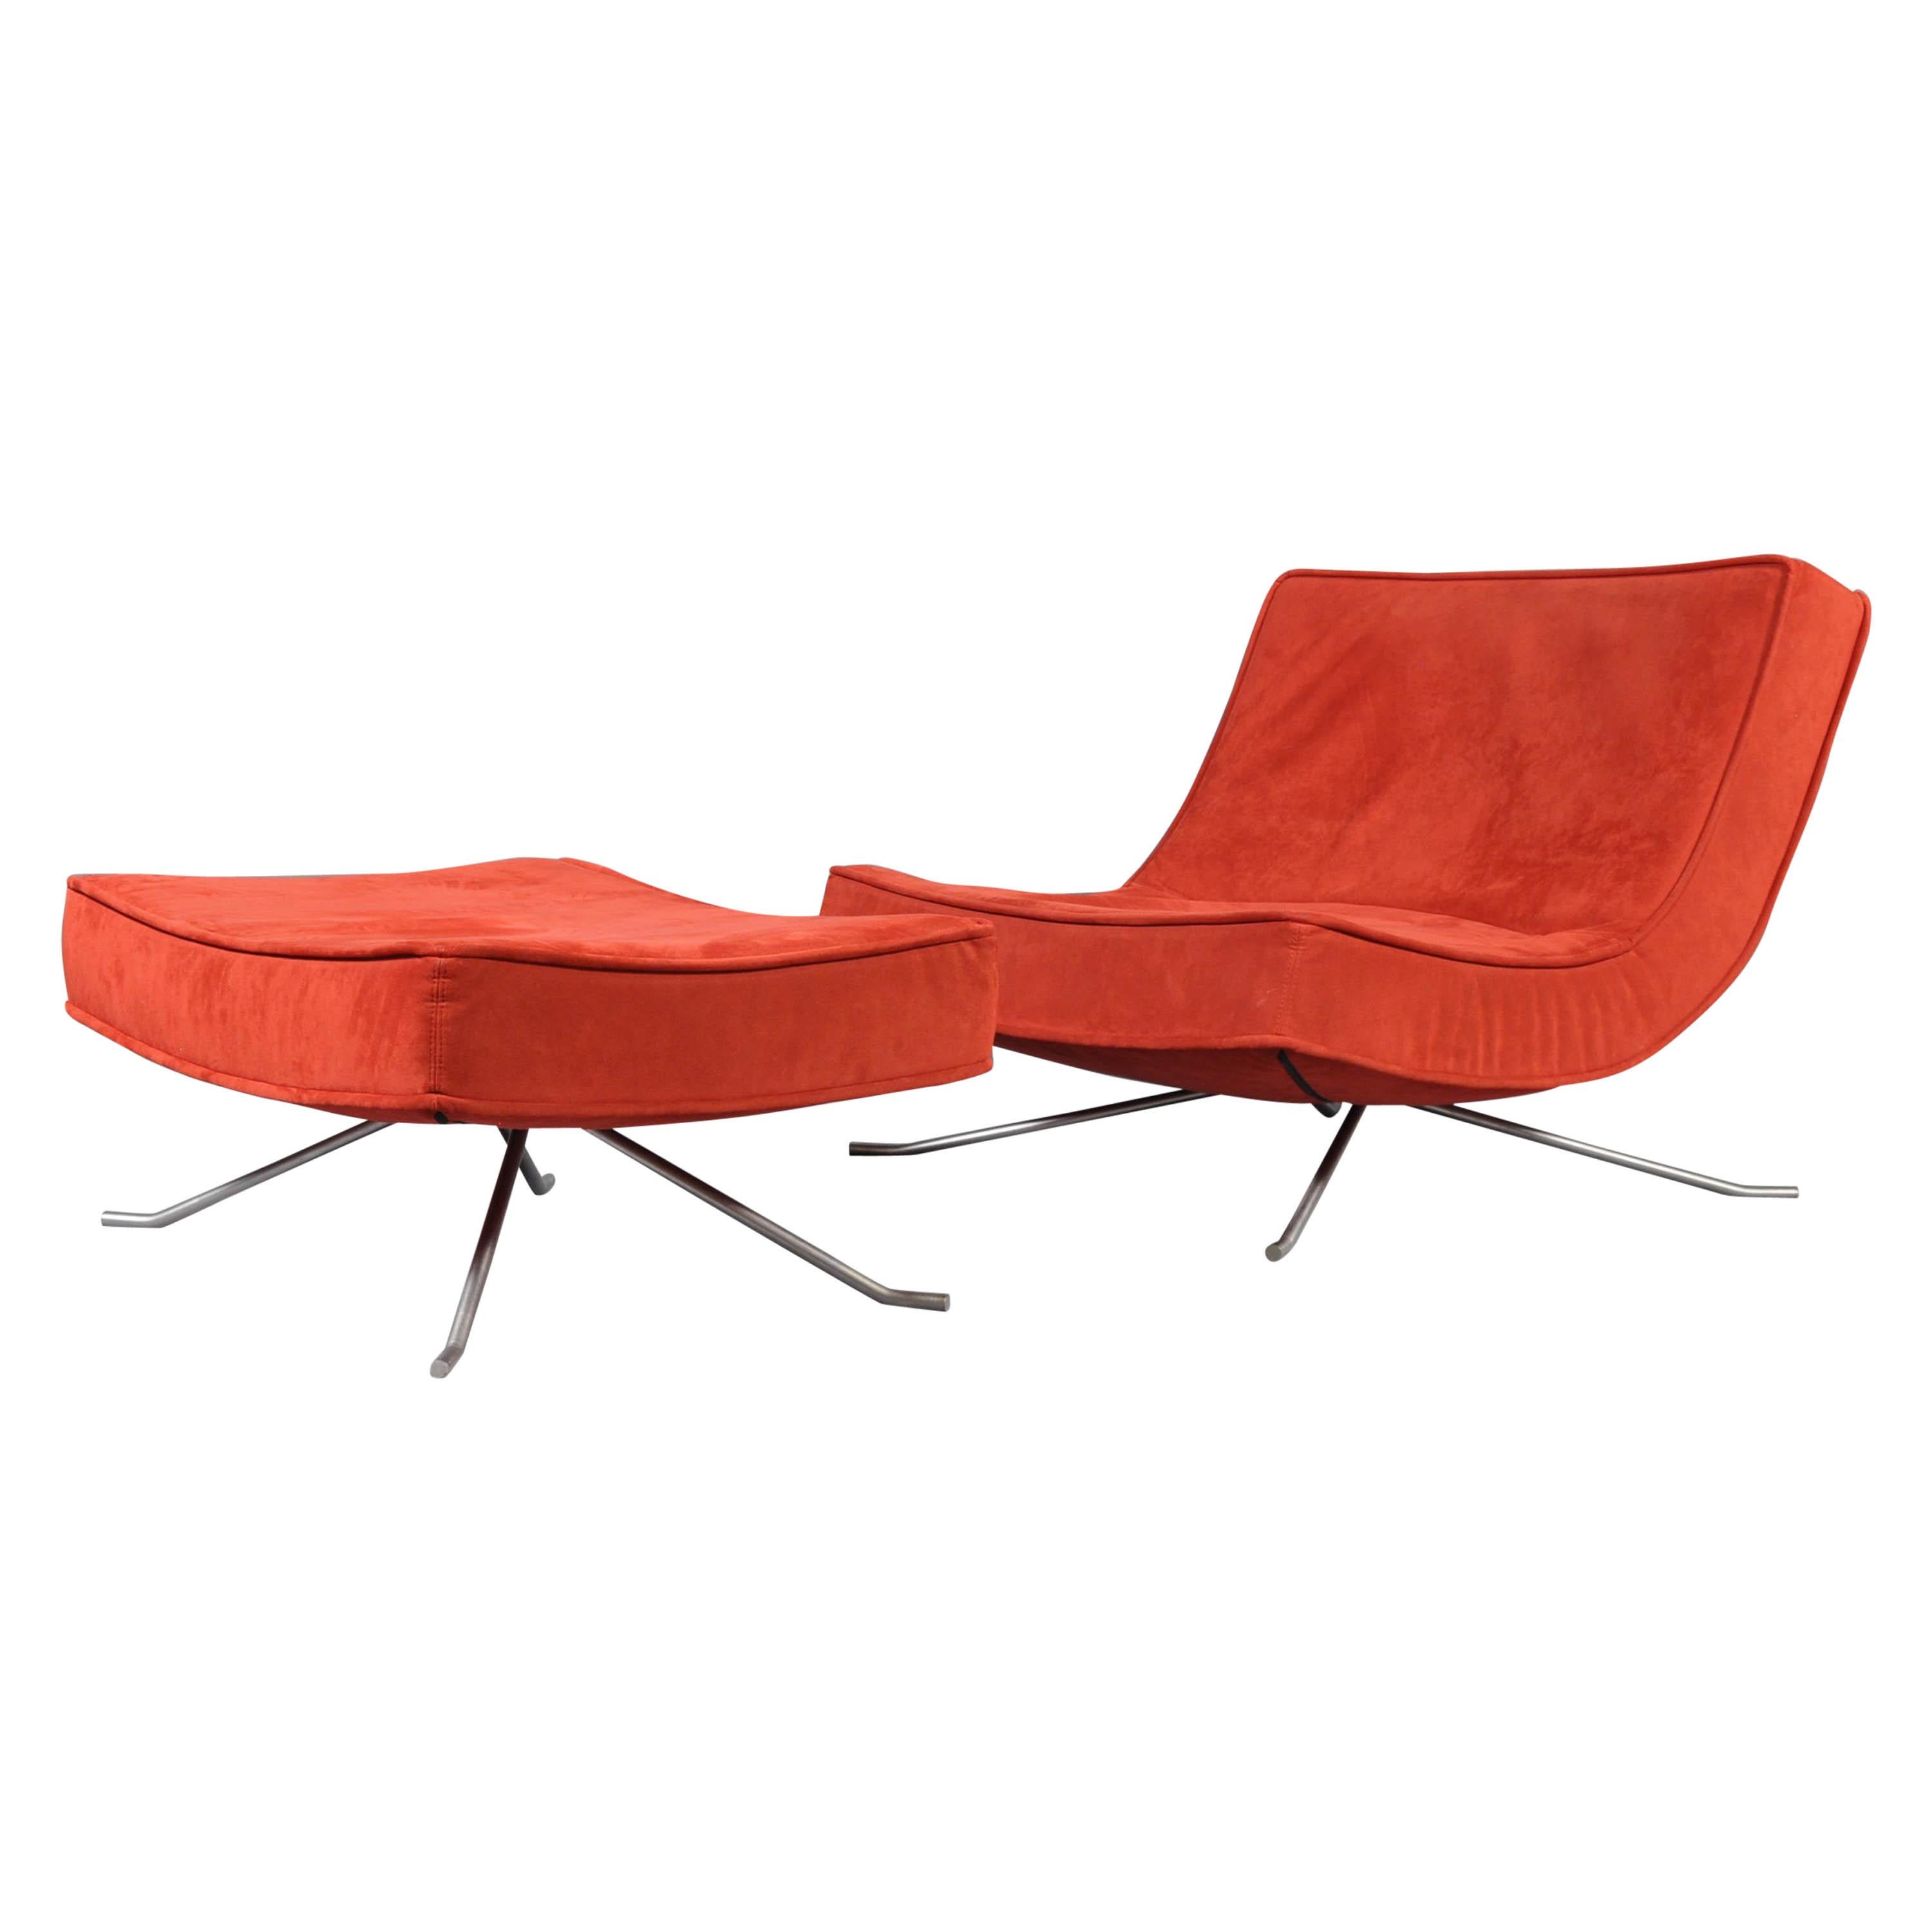 Vintage Red Ligne Roset 'Pop' Easy Lounge Chair and Ottoman by Christian Werner